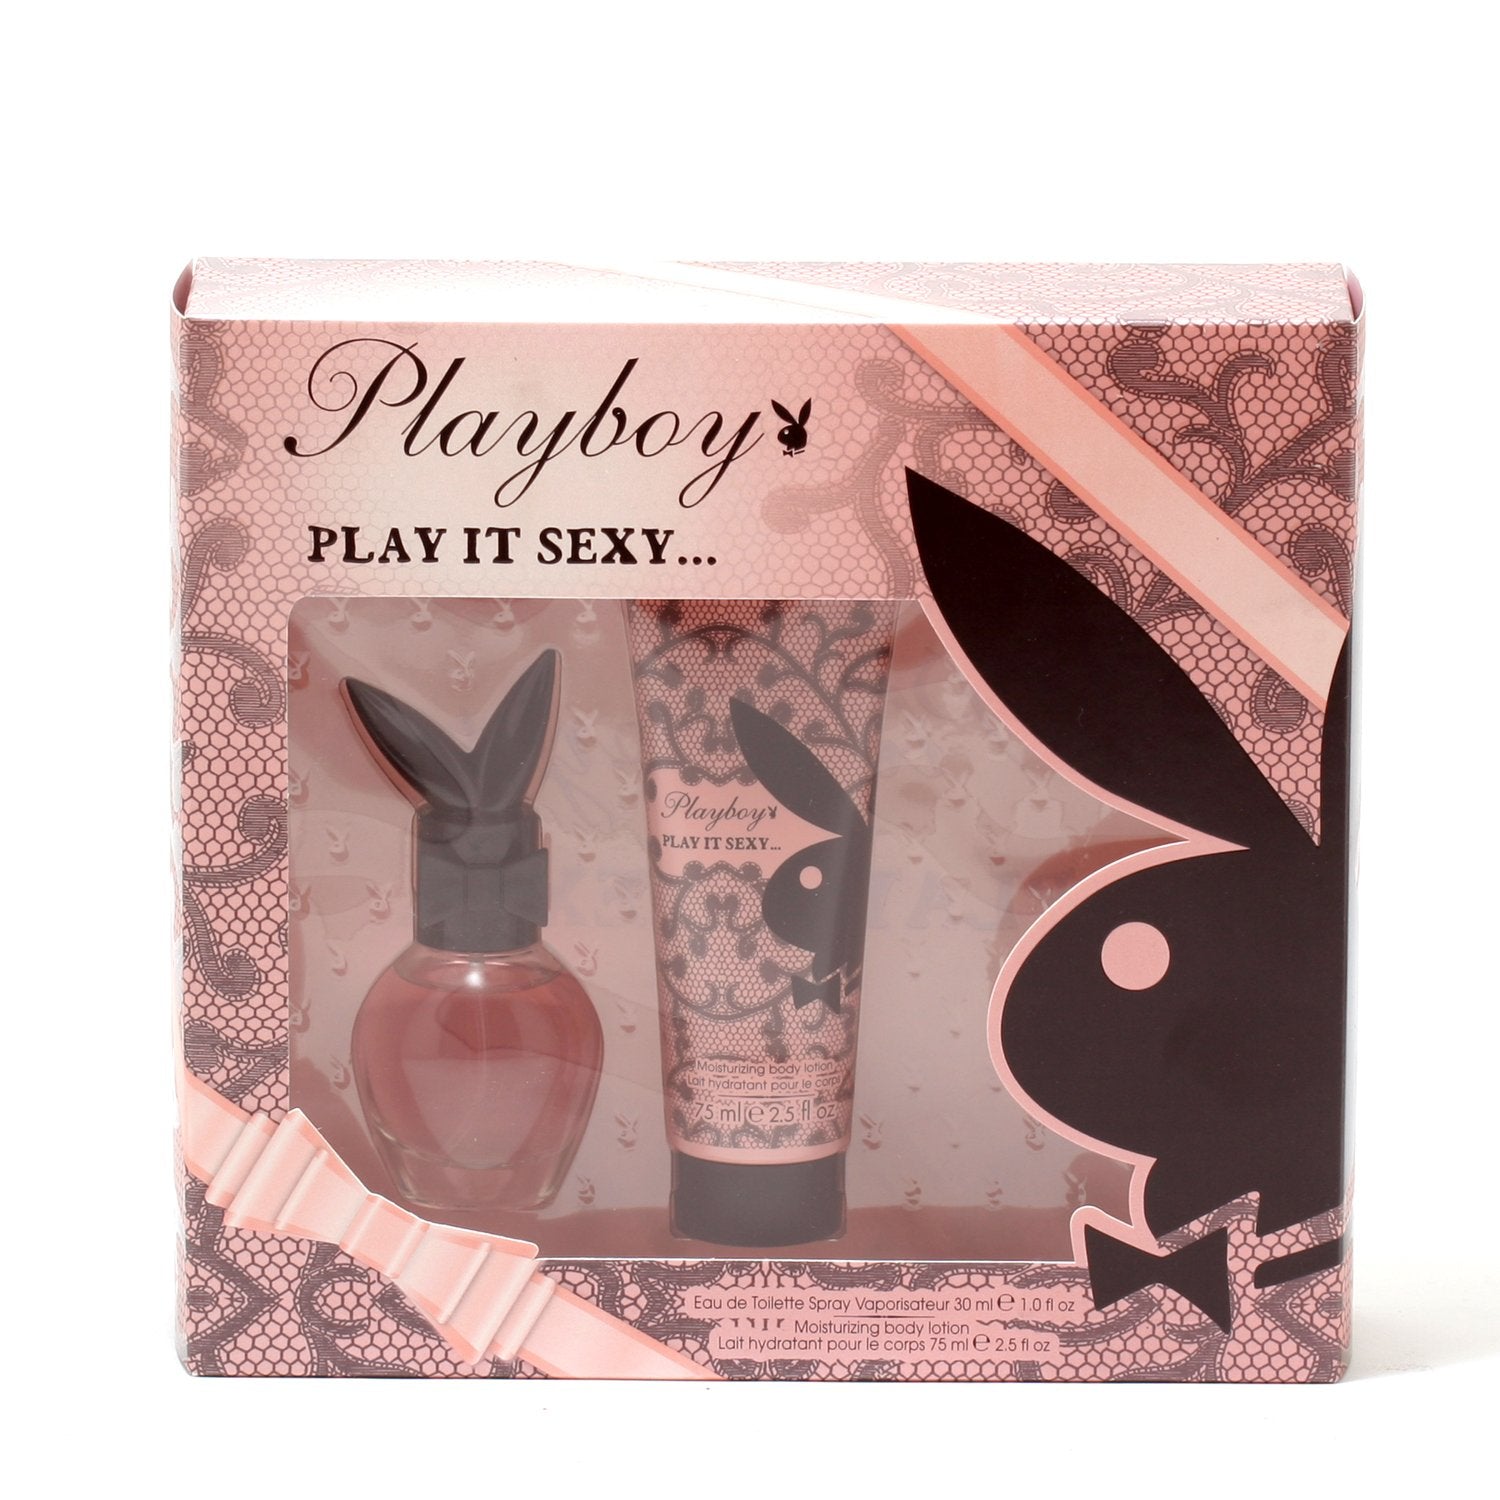 Perfume Sets - PLAYBOY PLAY IT SEXY FOR WOMEN - GIFT SET